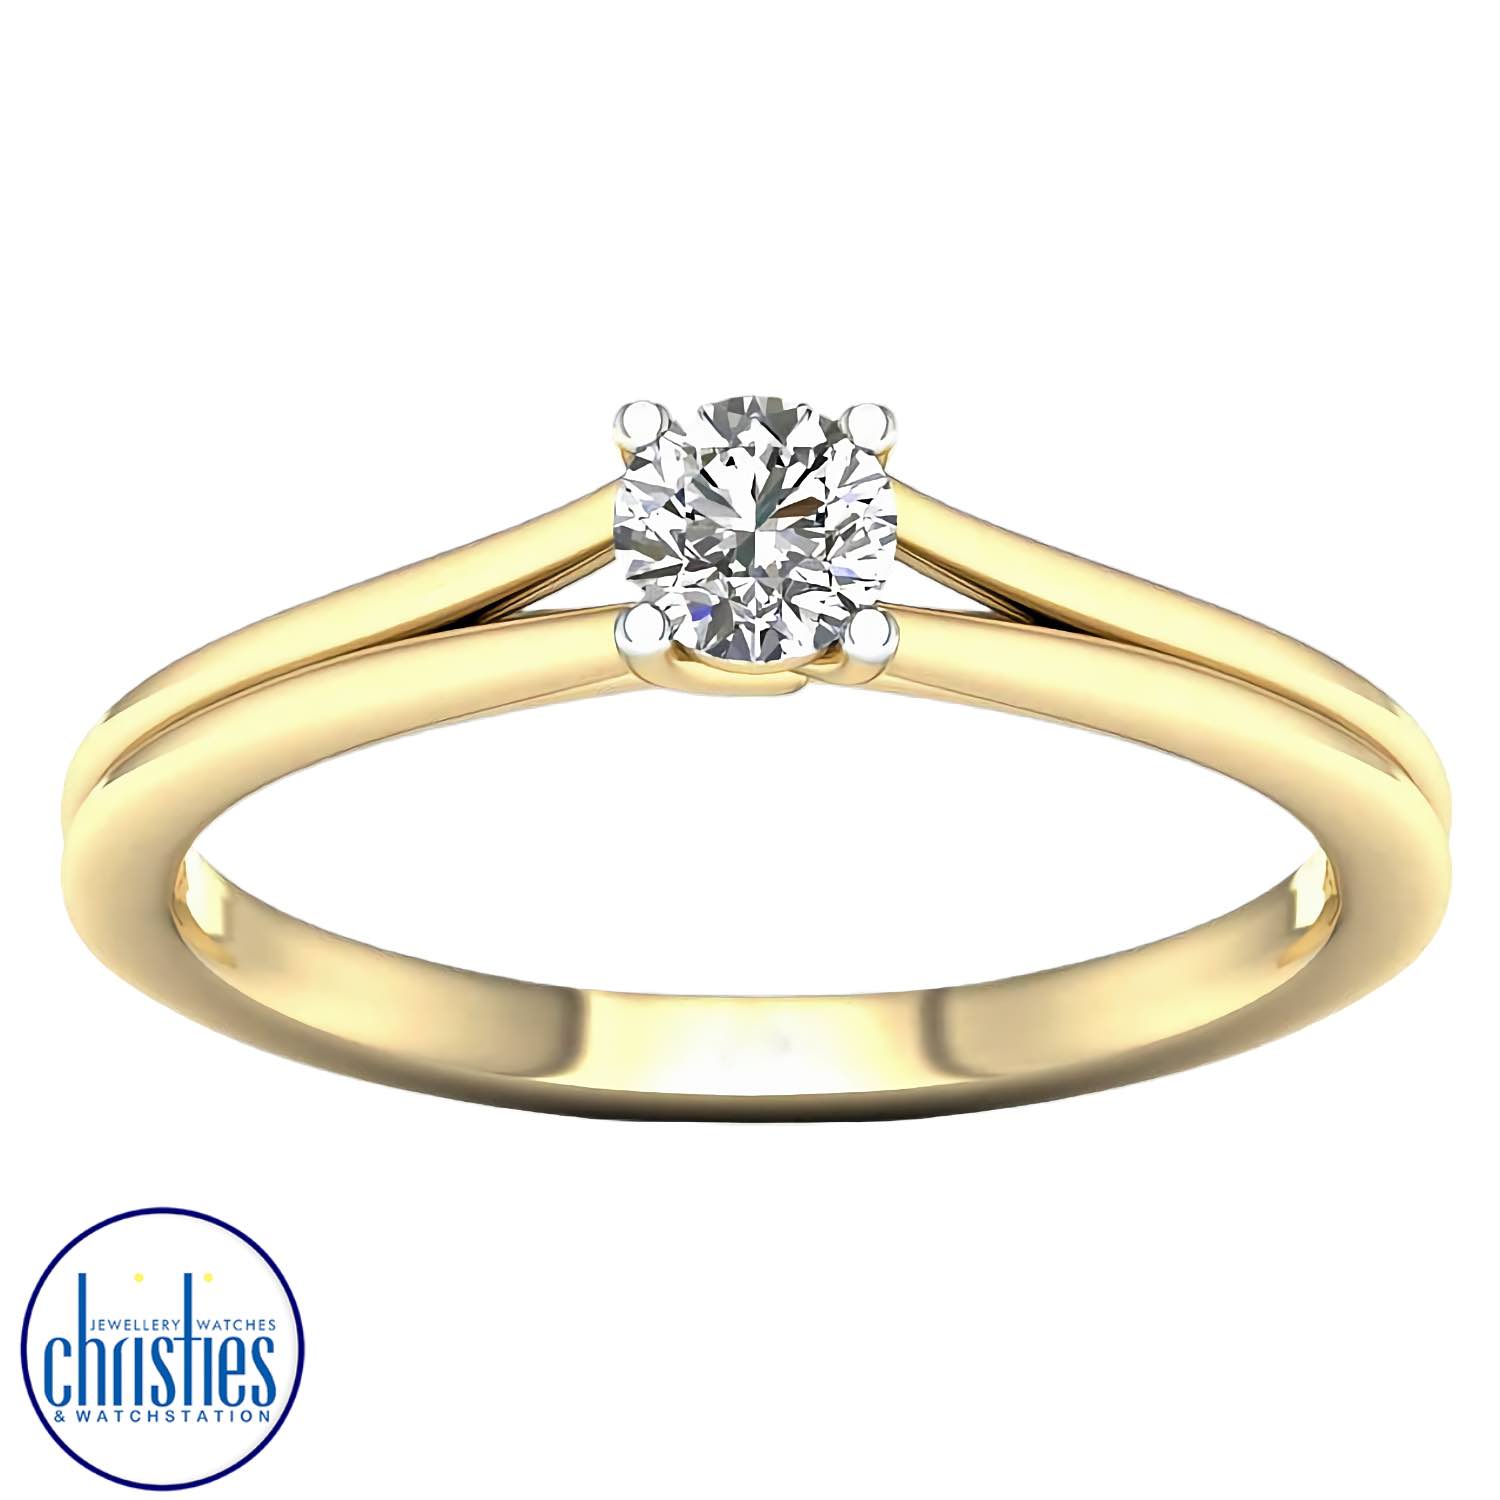 9ct Yellow Gold Diamond Solitaire 0.25ct Ring MSD0471EG. A 9ct yellow gold diamond ring with a total of 0.25ct of diamonds  Afterpay - Split your purchase into 4 instalments - Pay for your purchase over 4 instalments, due every two weeks. You’ll pay your 